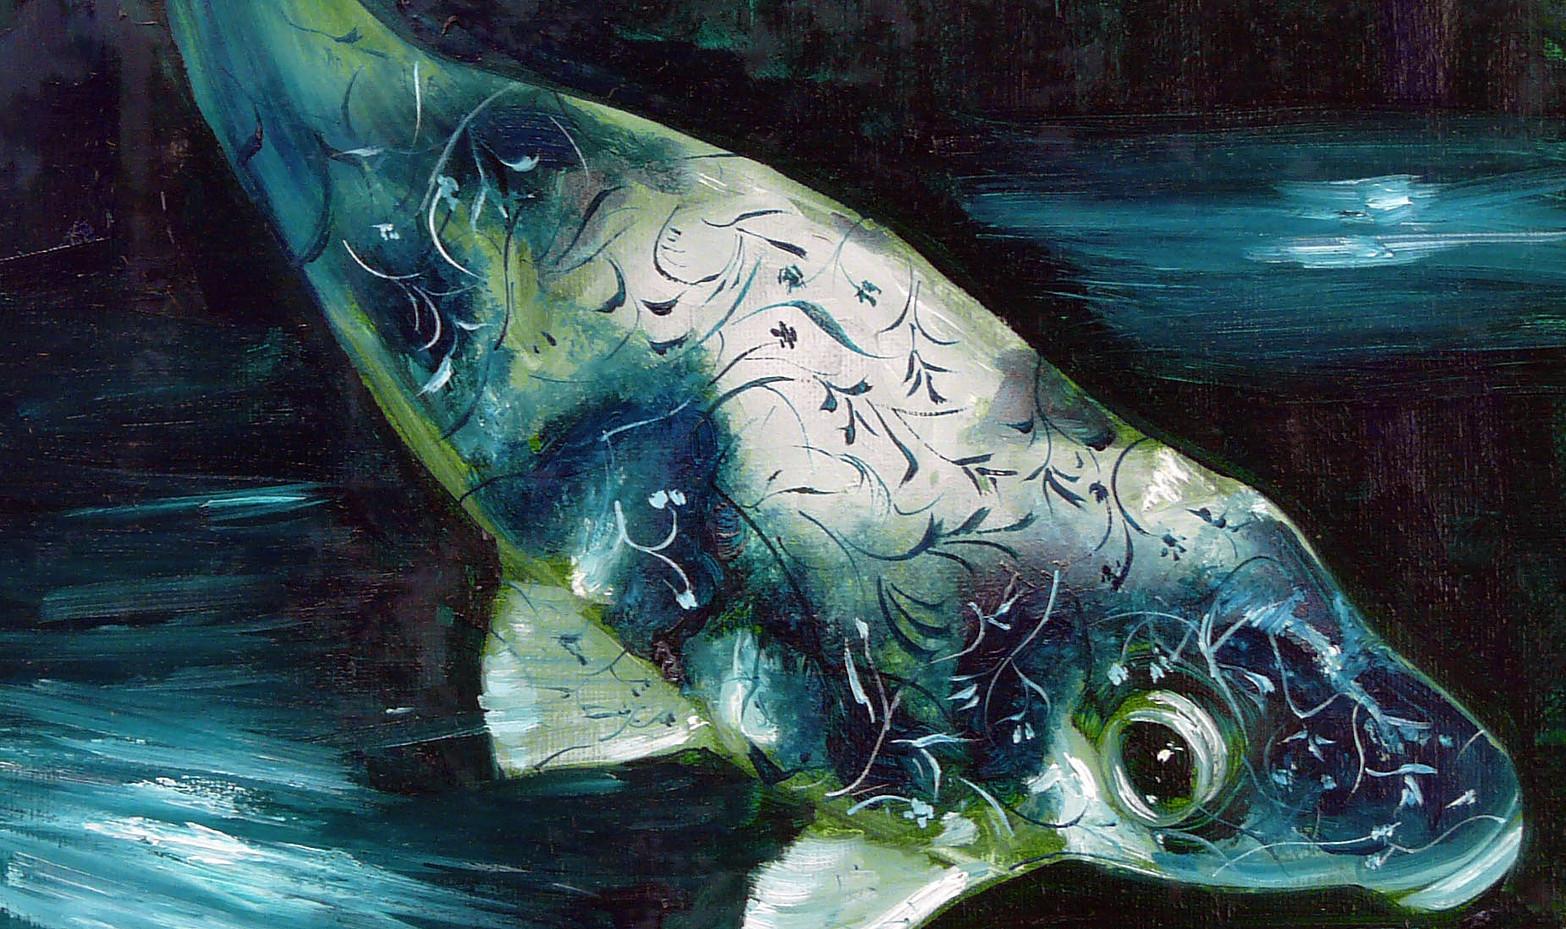 Abyss 5A - contemporary and classic painting, elegant and strong fish subject 